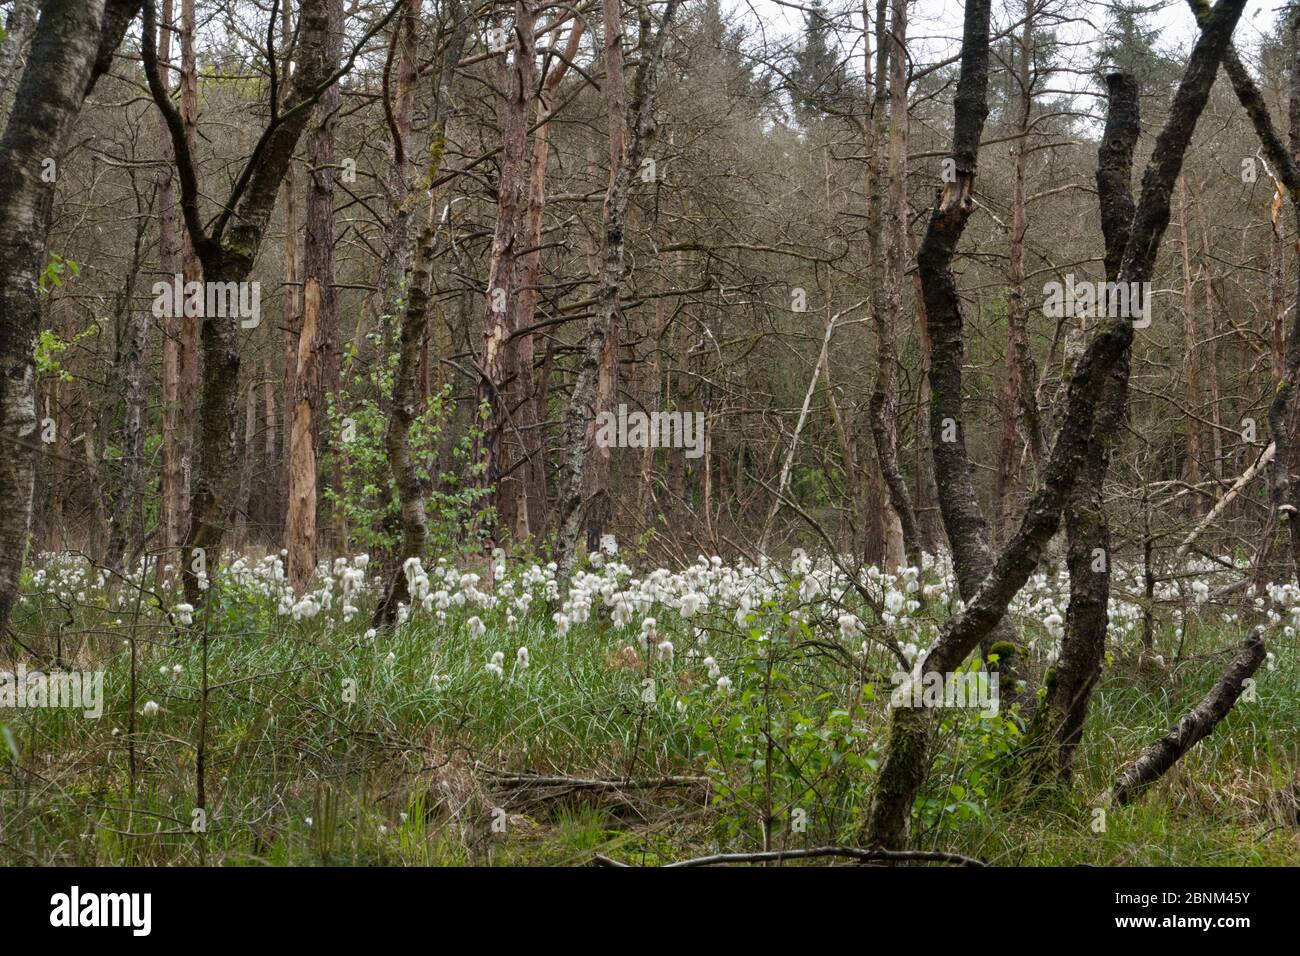 Drowning forest caused by rising groundwaterlevel: dead and dying birches and Hare's-tail Cottongrass in a moisty forest Stock Photo